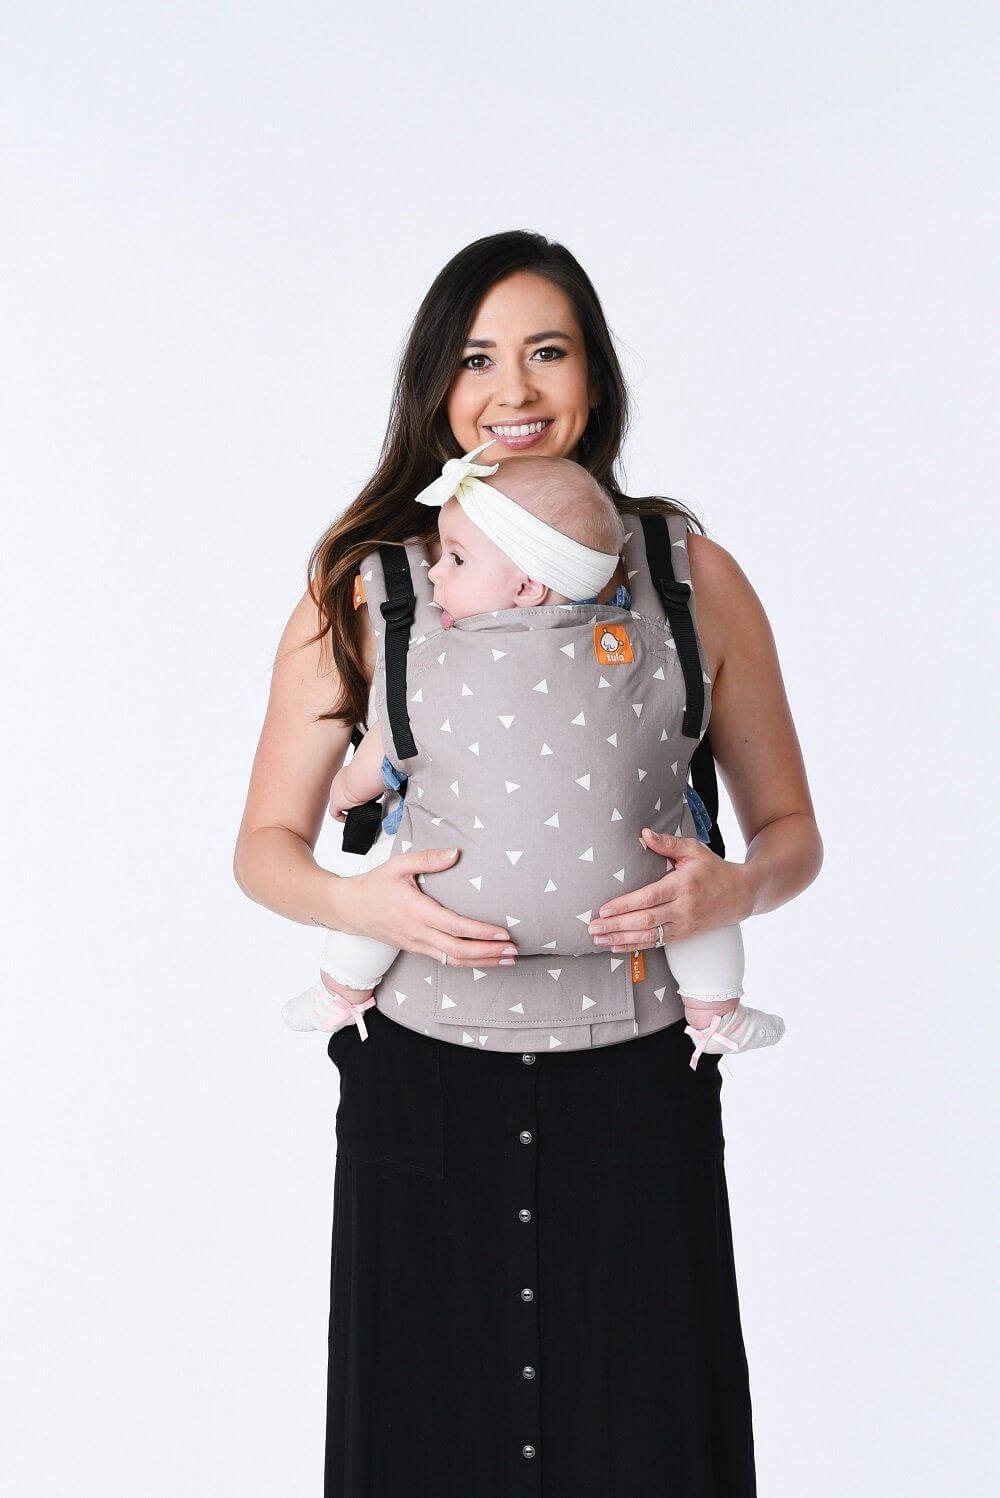 A mother smiling into the camera while using the ergonomic Free-to-Grow Baby Carrier Sleepy Dust from Tula.